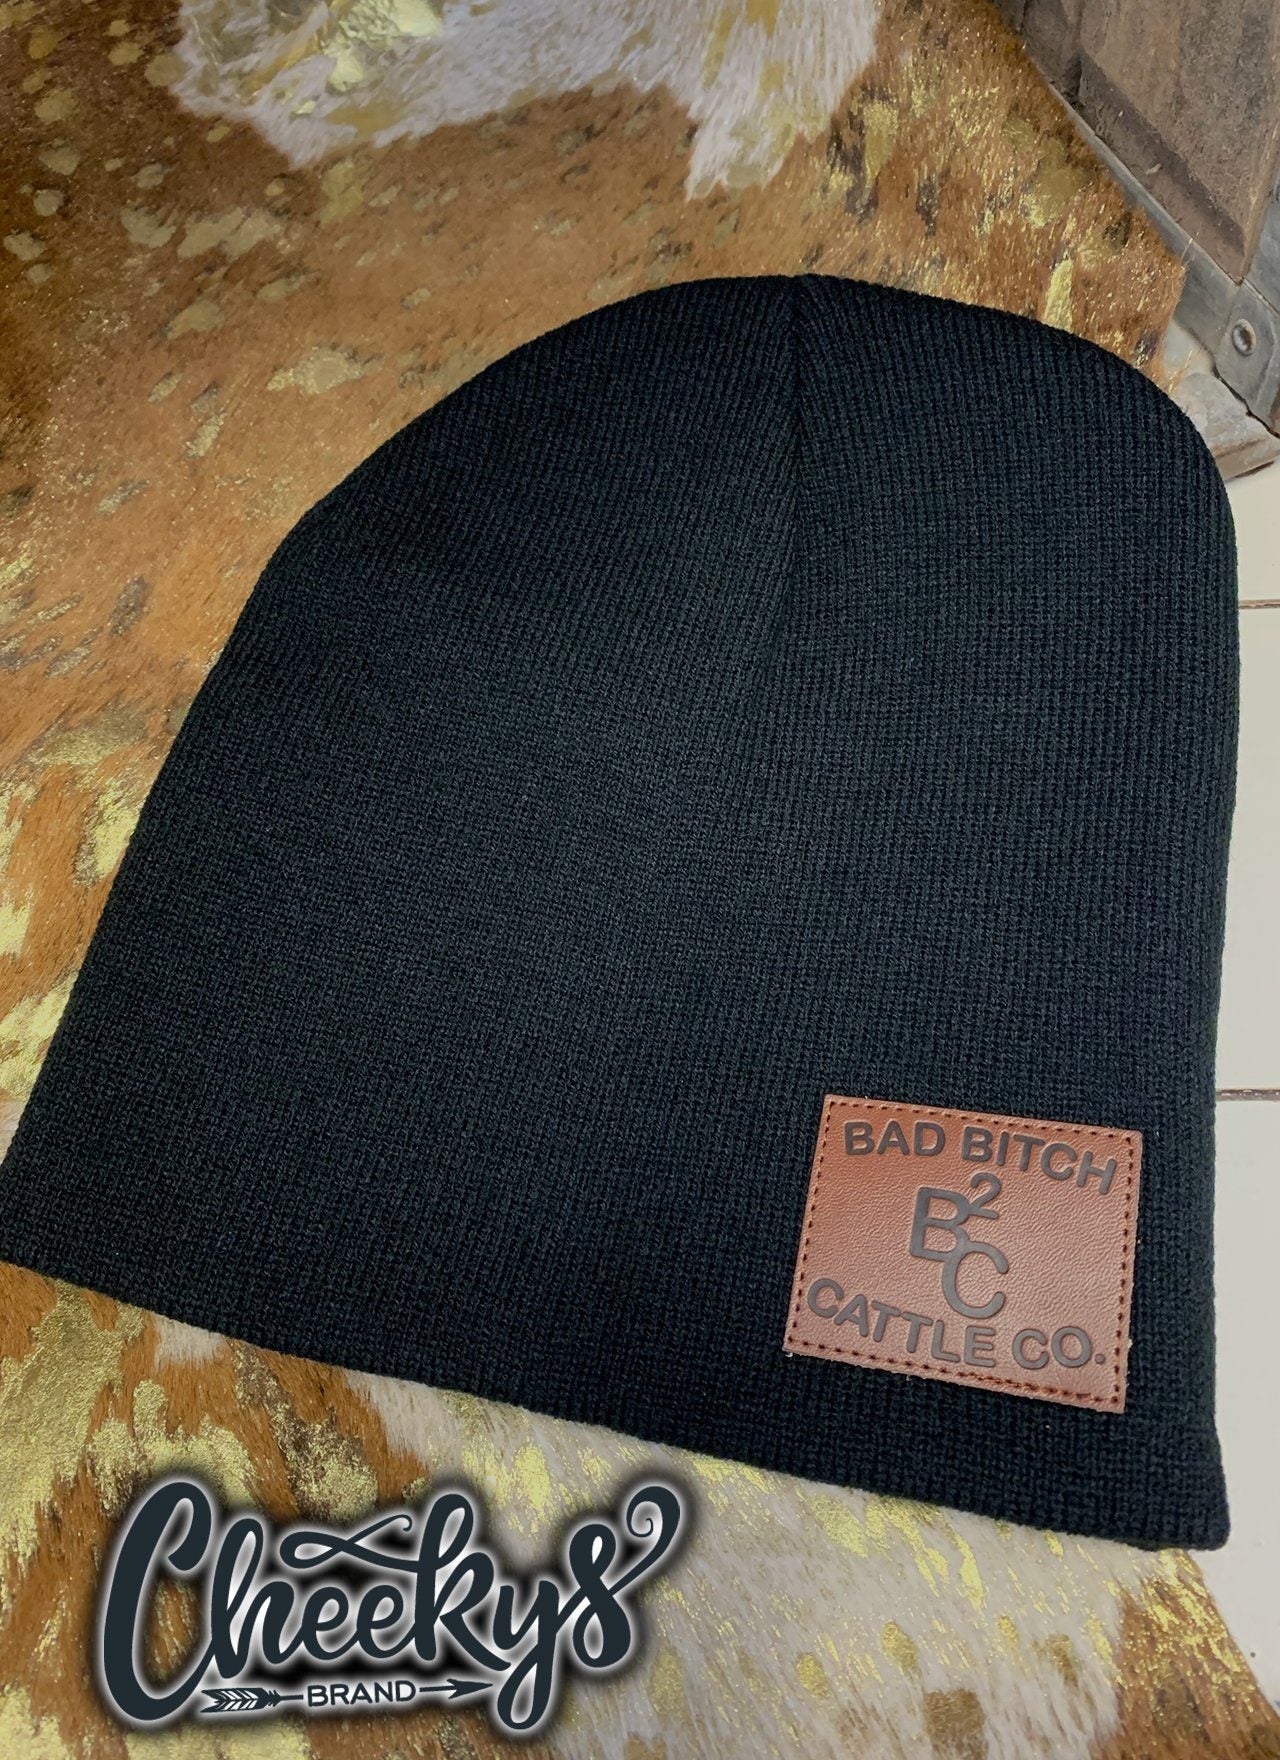 BB Cattle Co Black with Brown Patch Beanie Caps & Beanies 82 